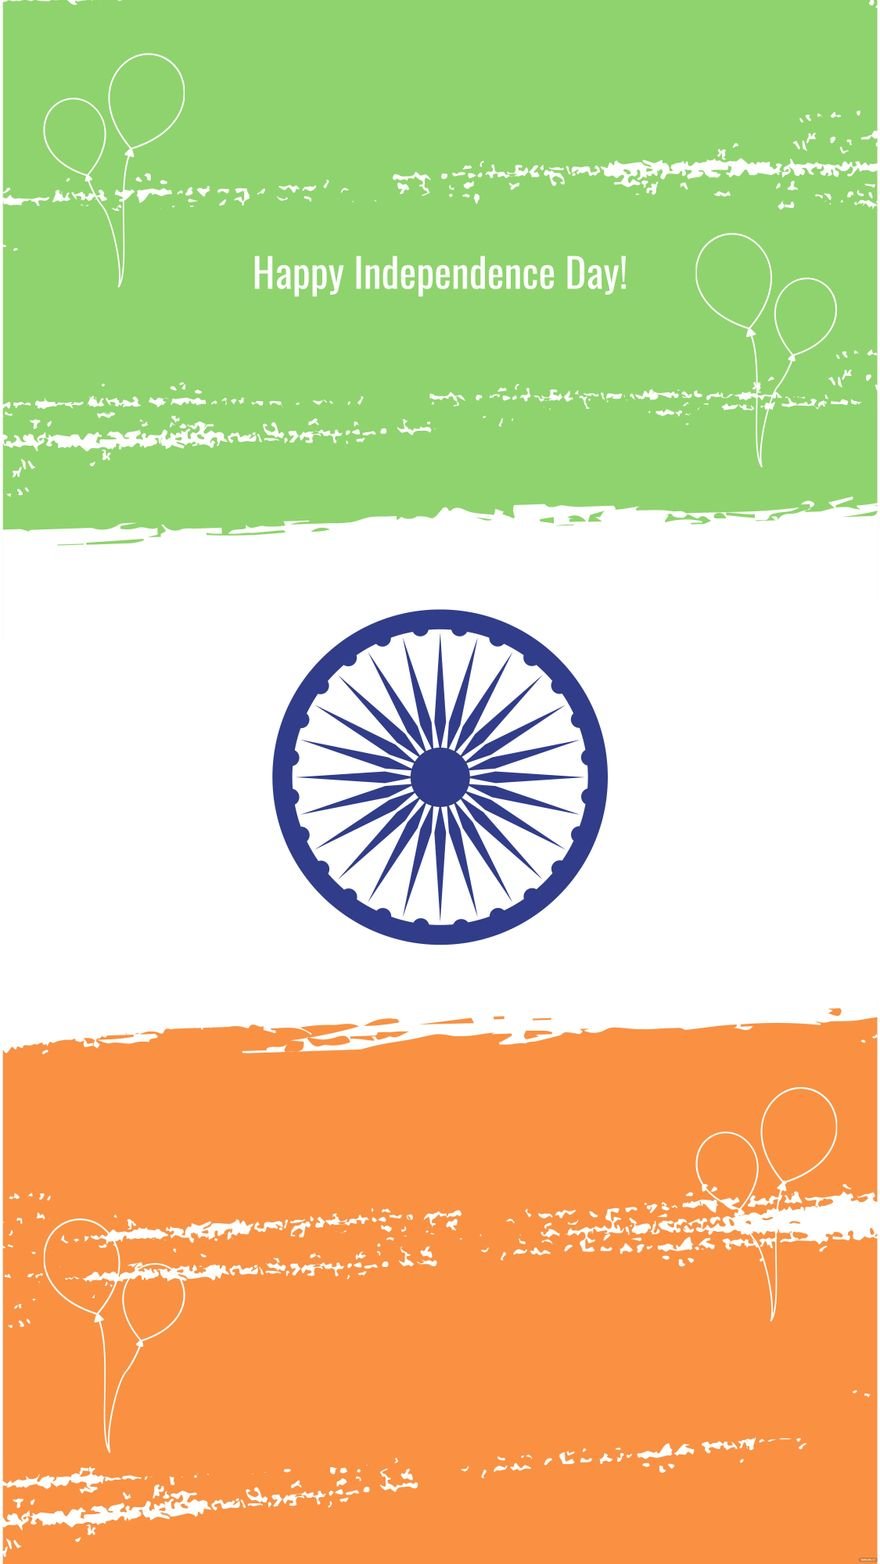 Free India Independence Day Iphone Wallpaper in Illustrator, EPS, SVG, JPG, PNG